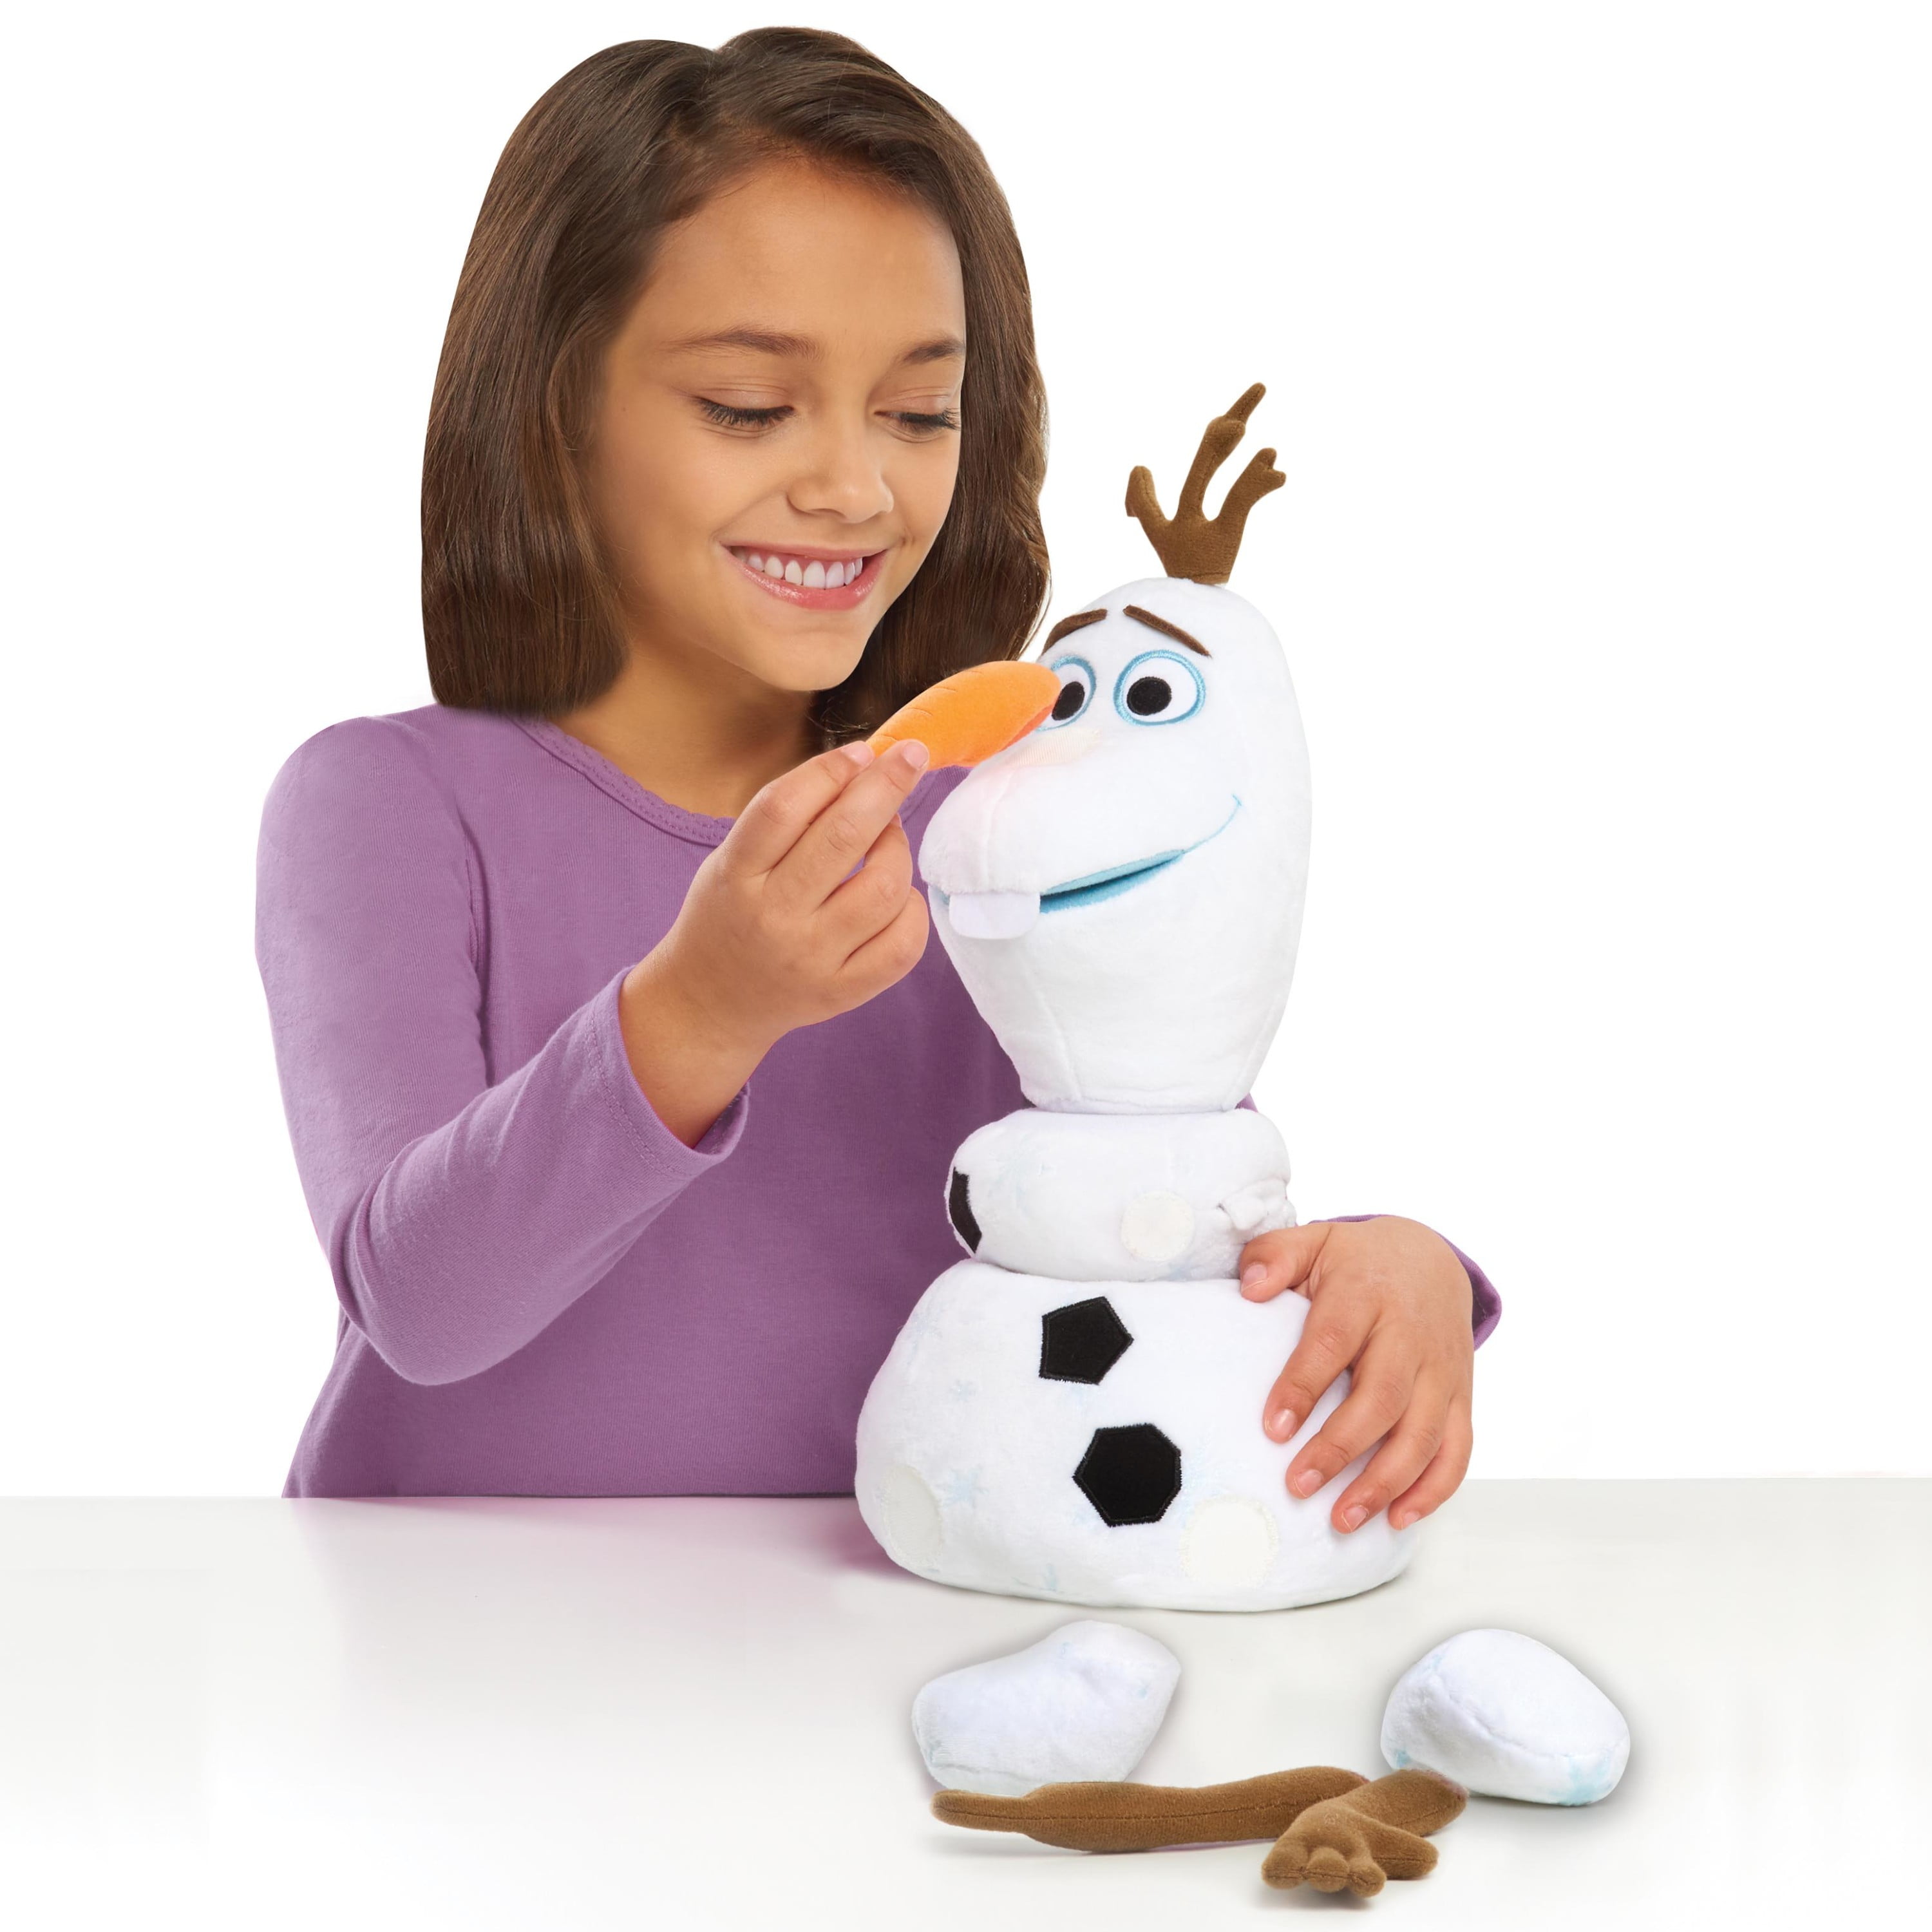 Disney\'s Frozen 2 Shape Shifter Olaf Plush, Officially Licensed Kids Toys  for Ages 3 Up, Gifts and Presents